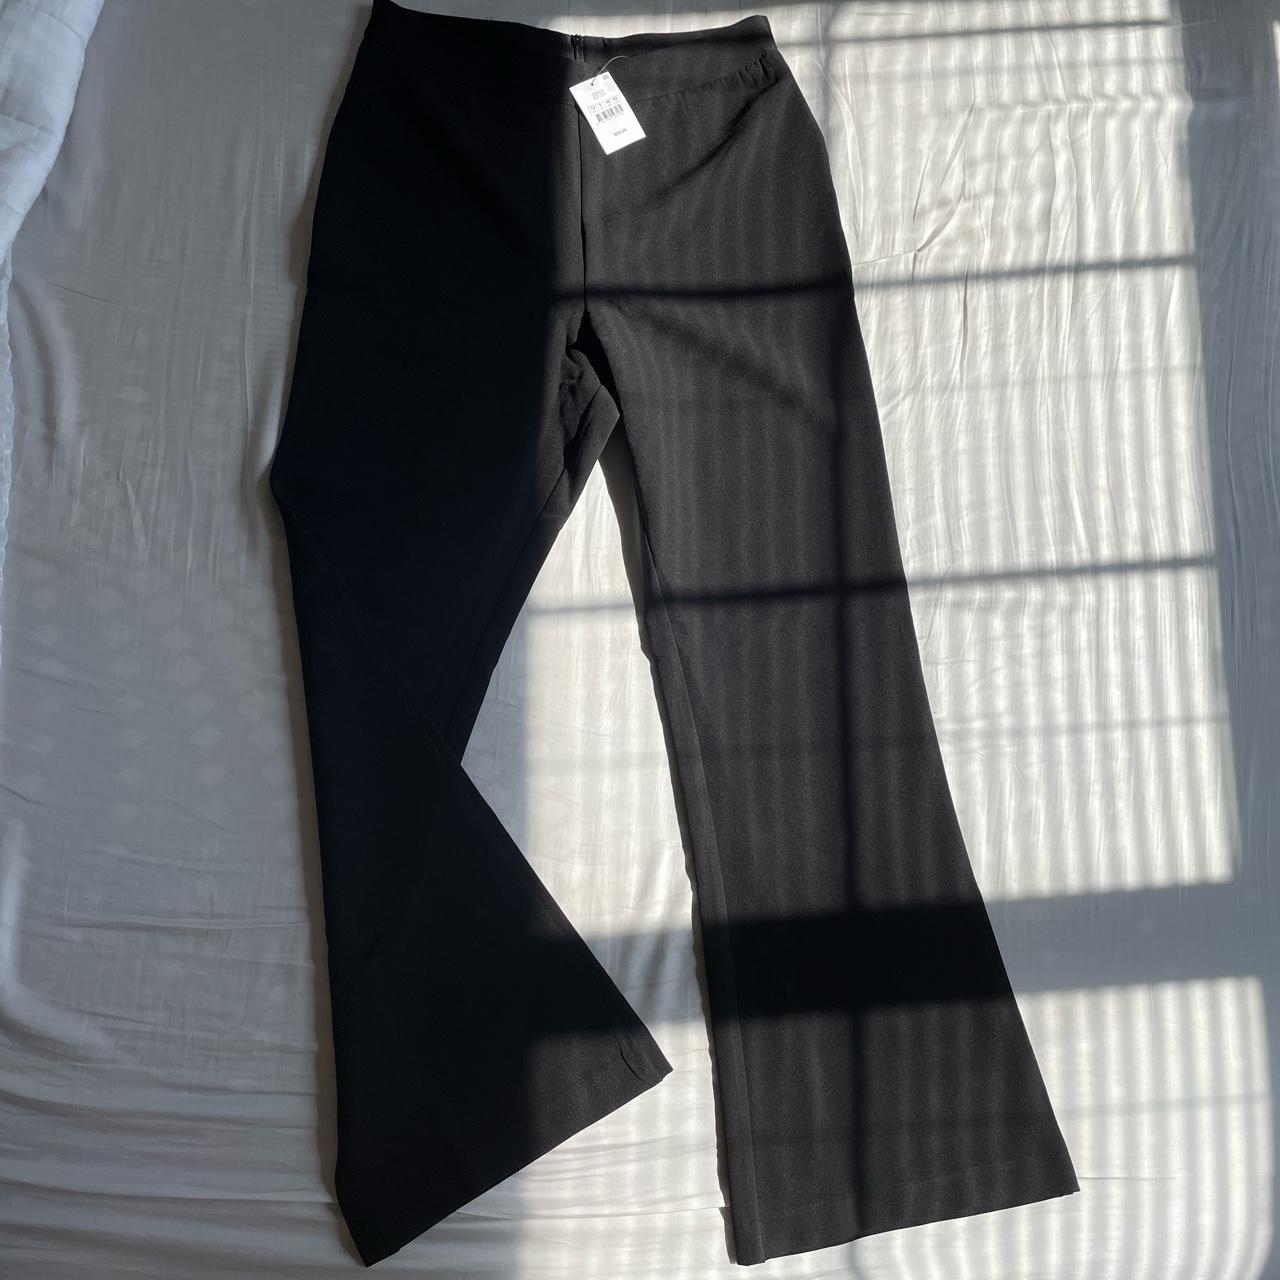 Black satin flared pants from cotton on, never worn - Depop